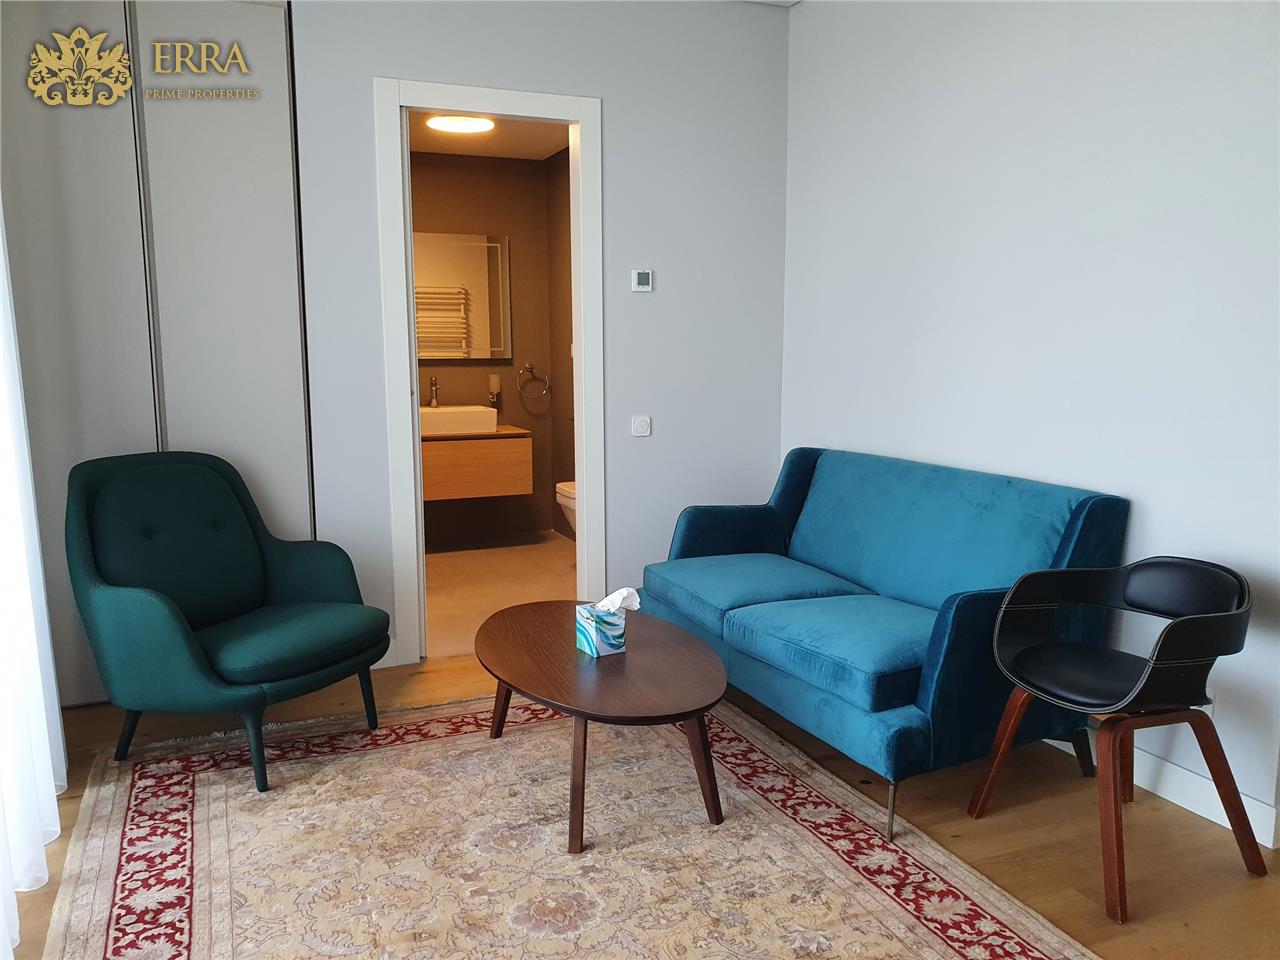 Spectacular view, spacious, bright 5 rooms apartment. 2 parking places. Floreasca